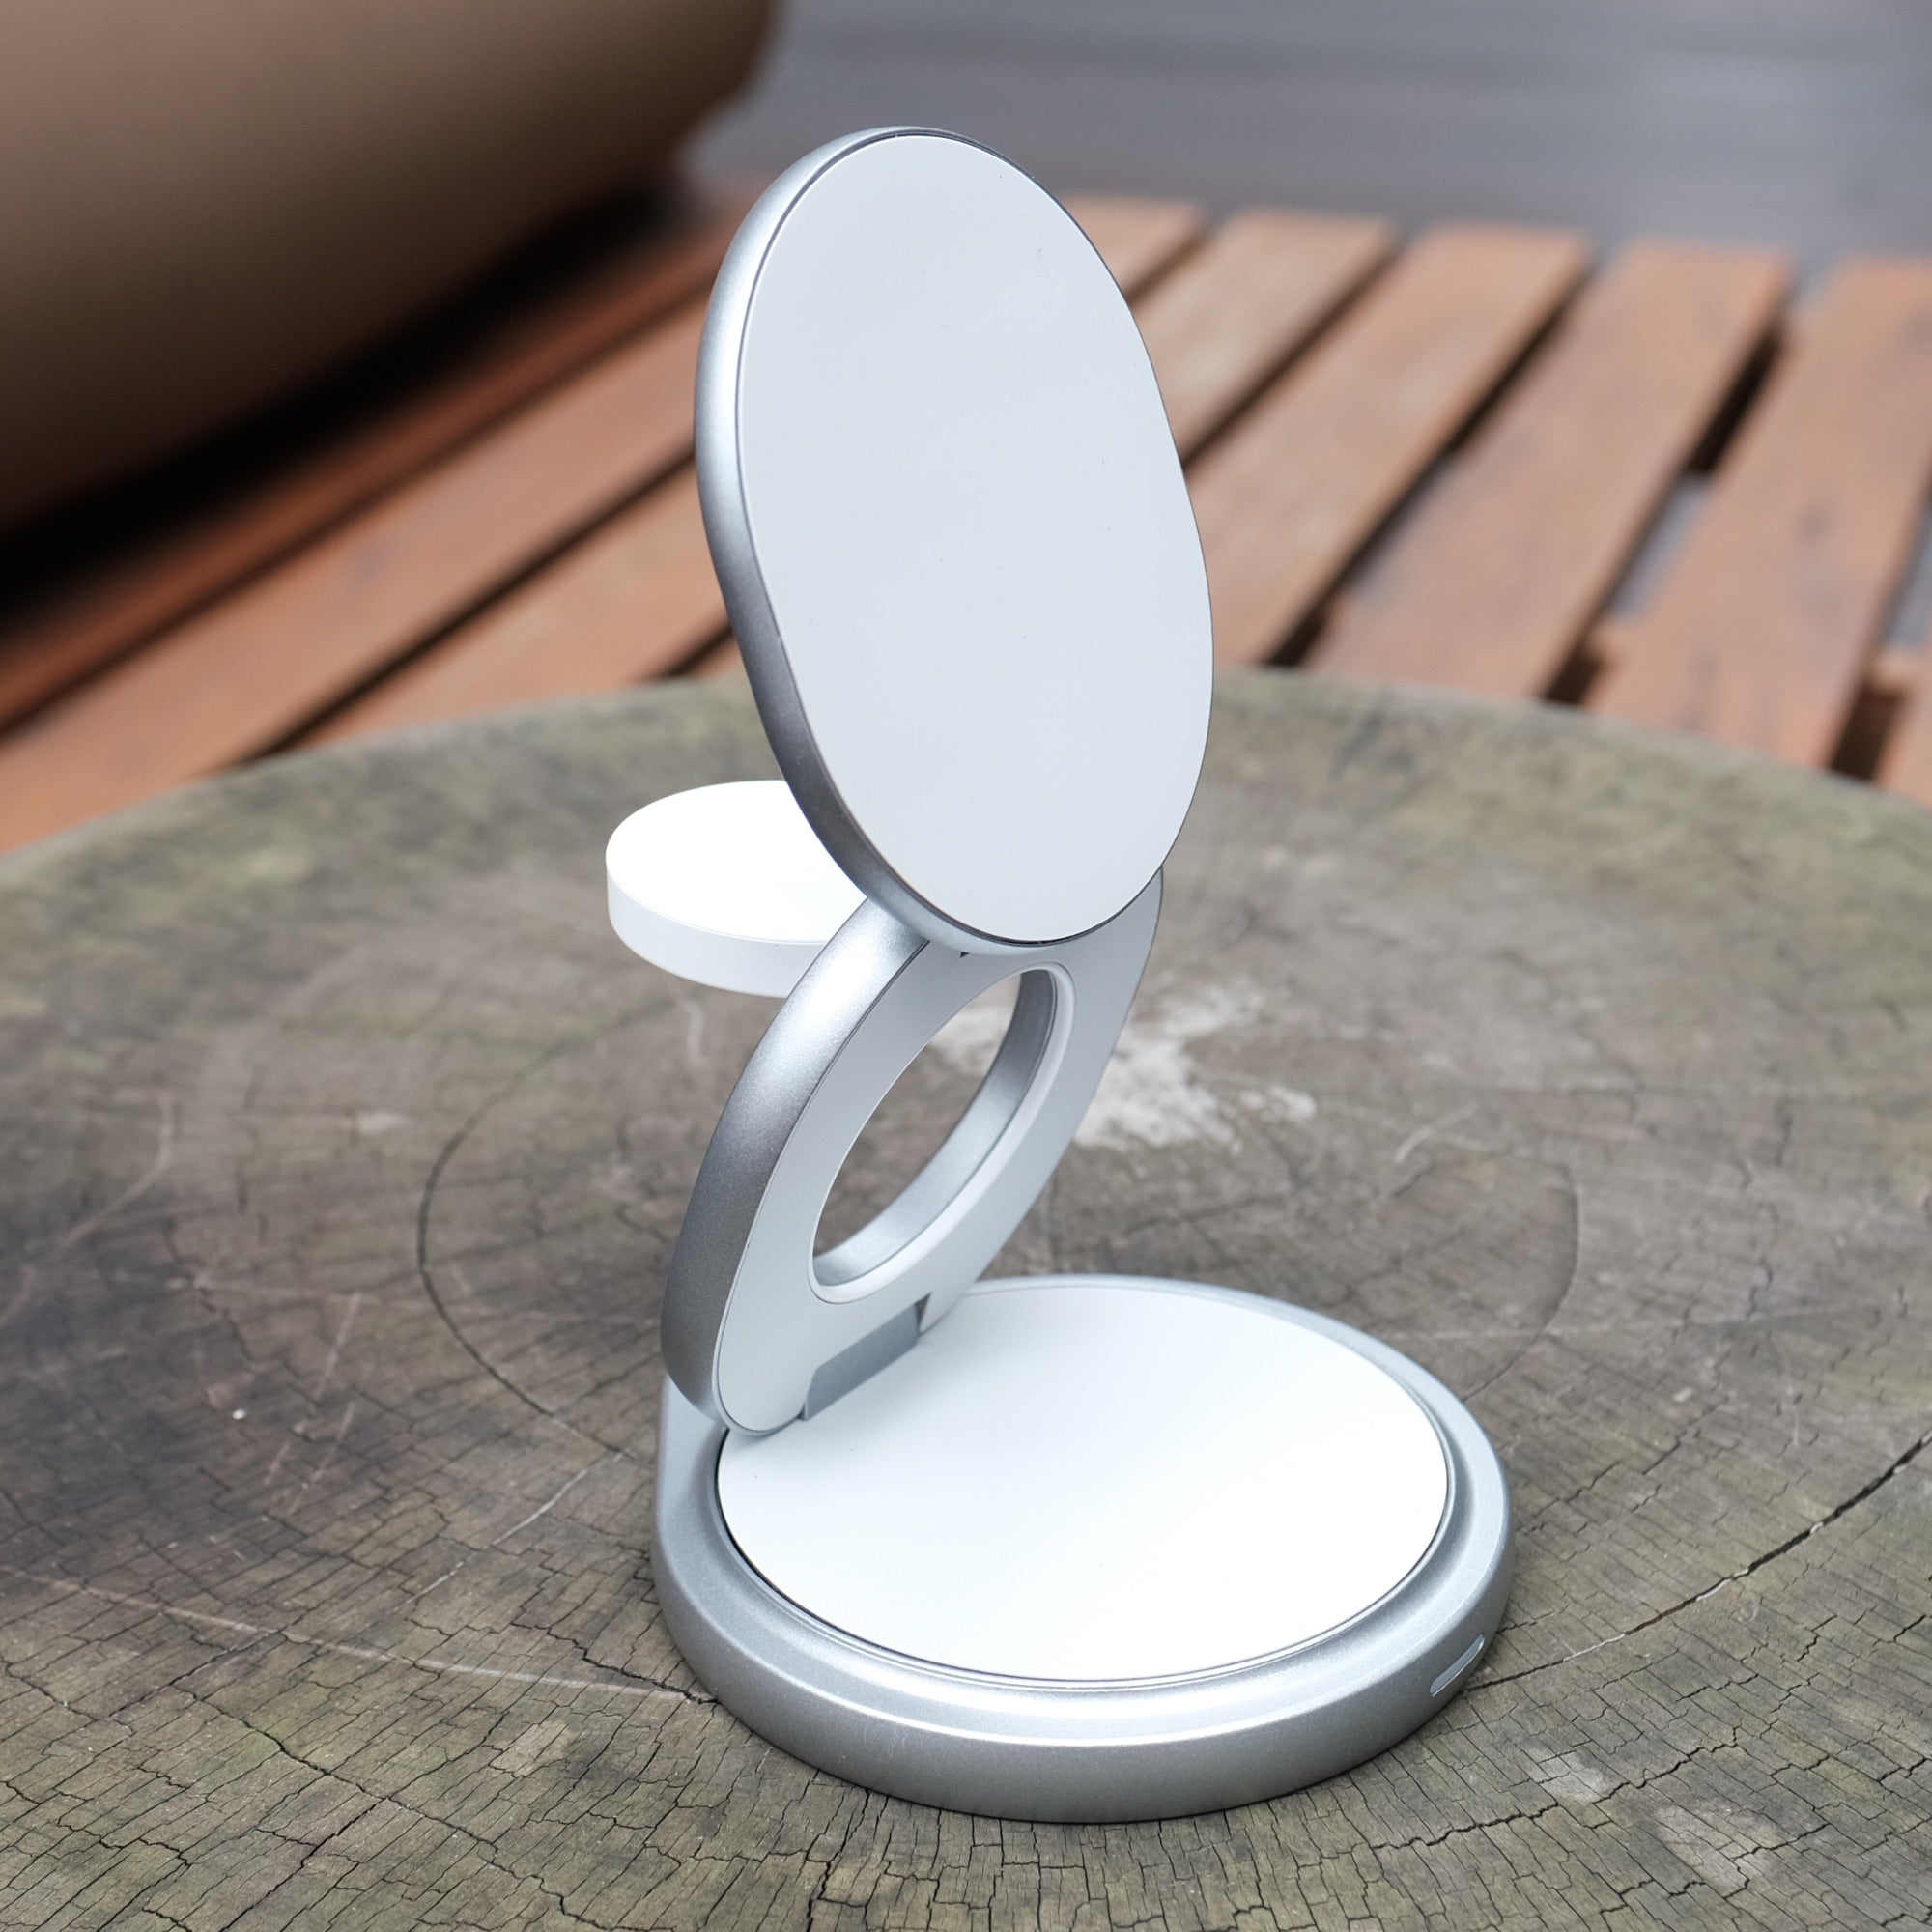 The Nexus 3-in-1 Wireless Charger